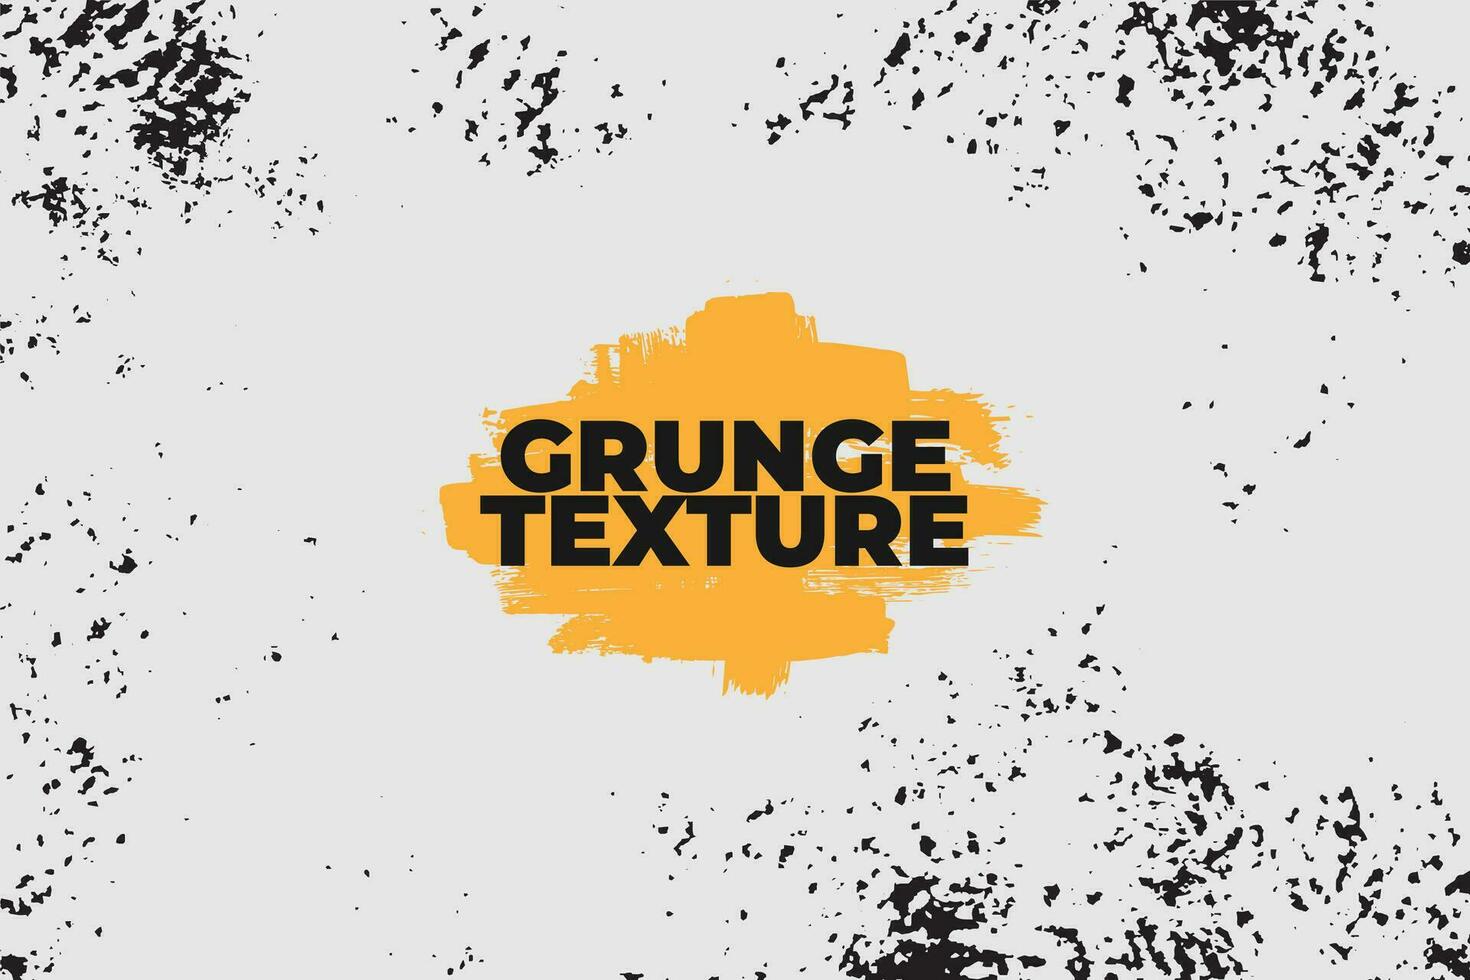 Grunge Texture black and white, dust particle and dust grain, vintage Distressed effect vector